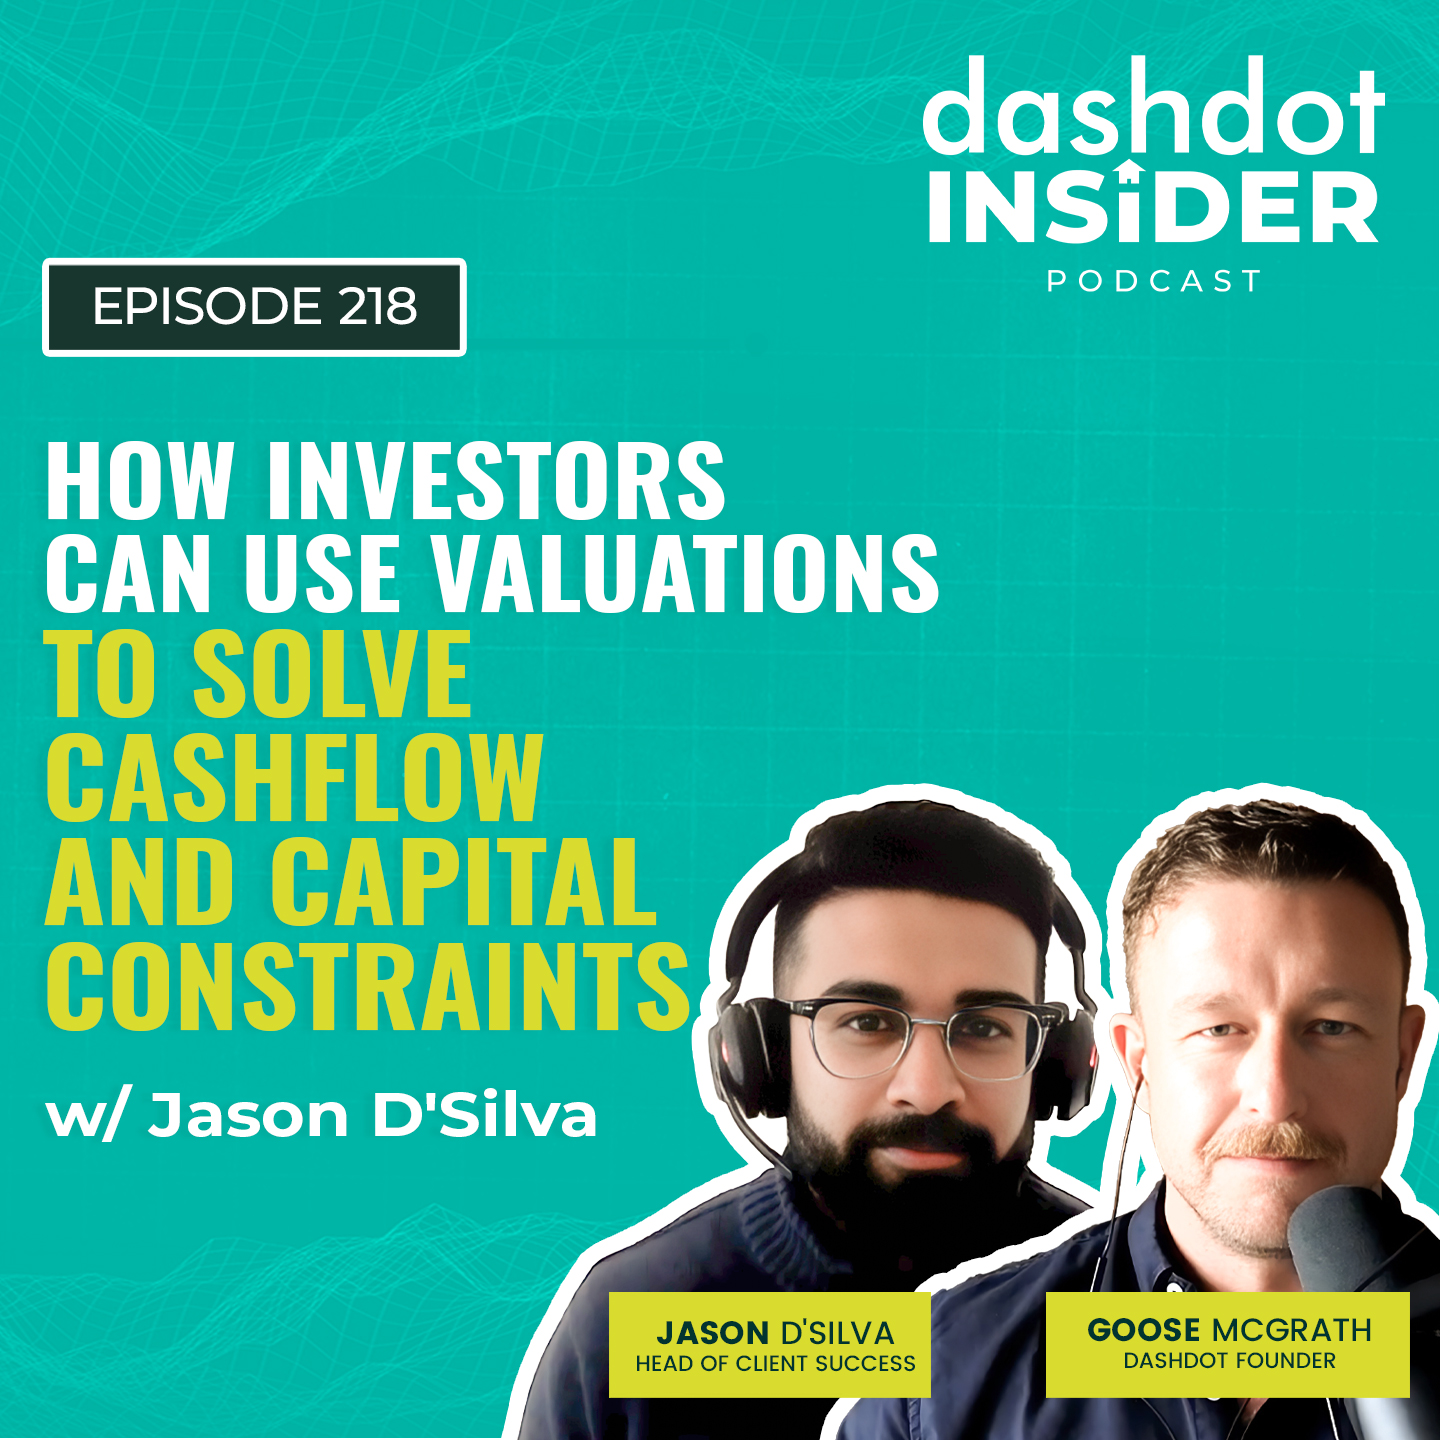 How Investors Can Use Valuations To Solve Cashflow and Capital Constraints w/ Jason D'Silva